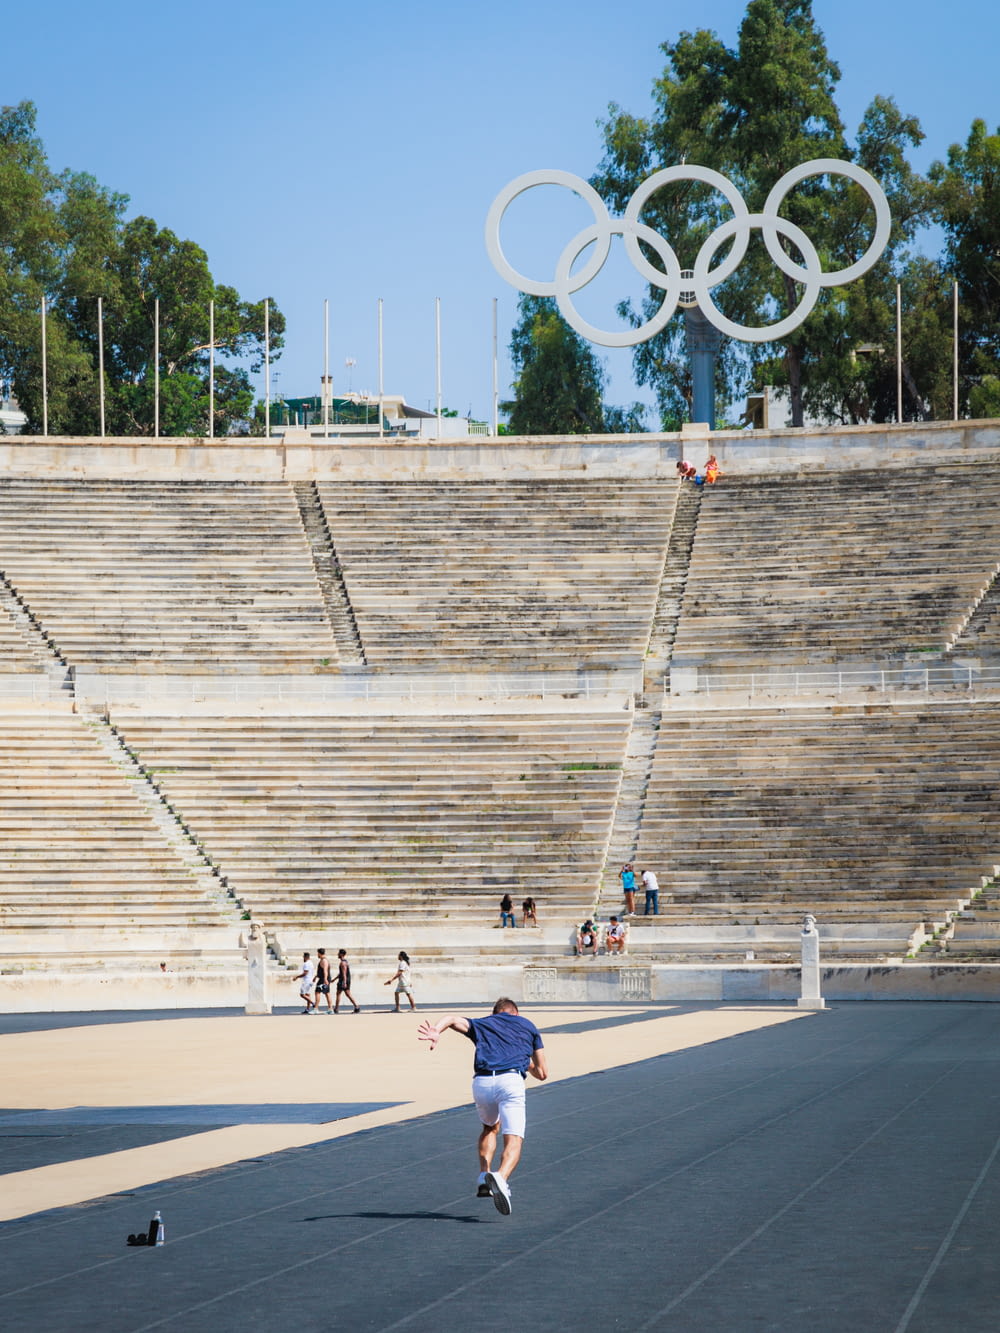 a man is skateboarding in front of a stadium